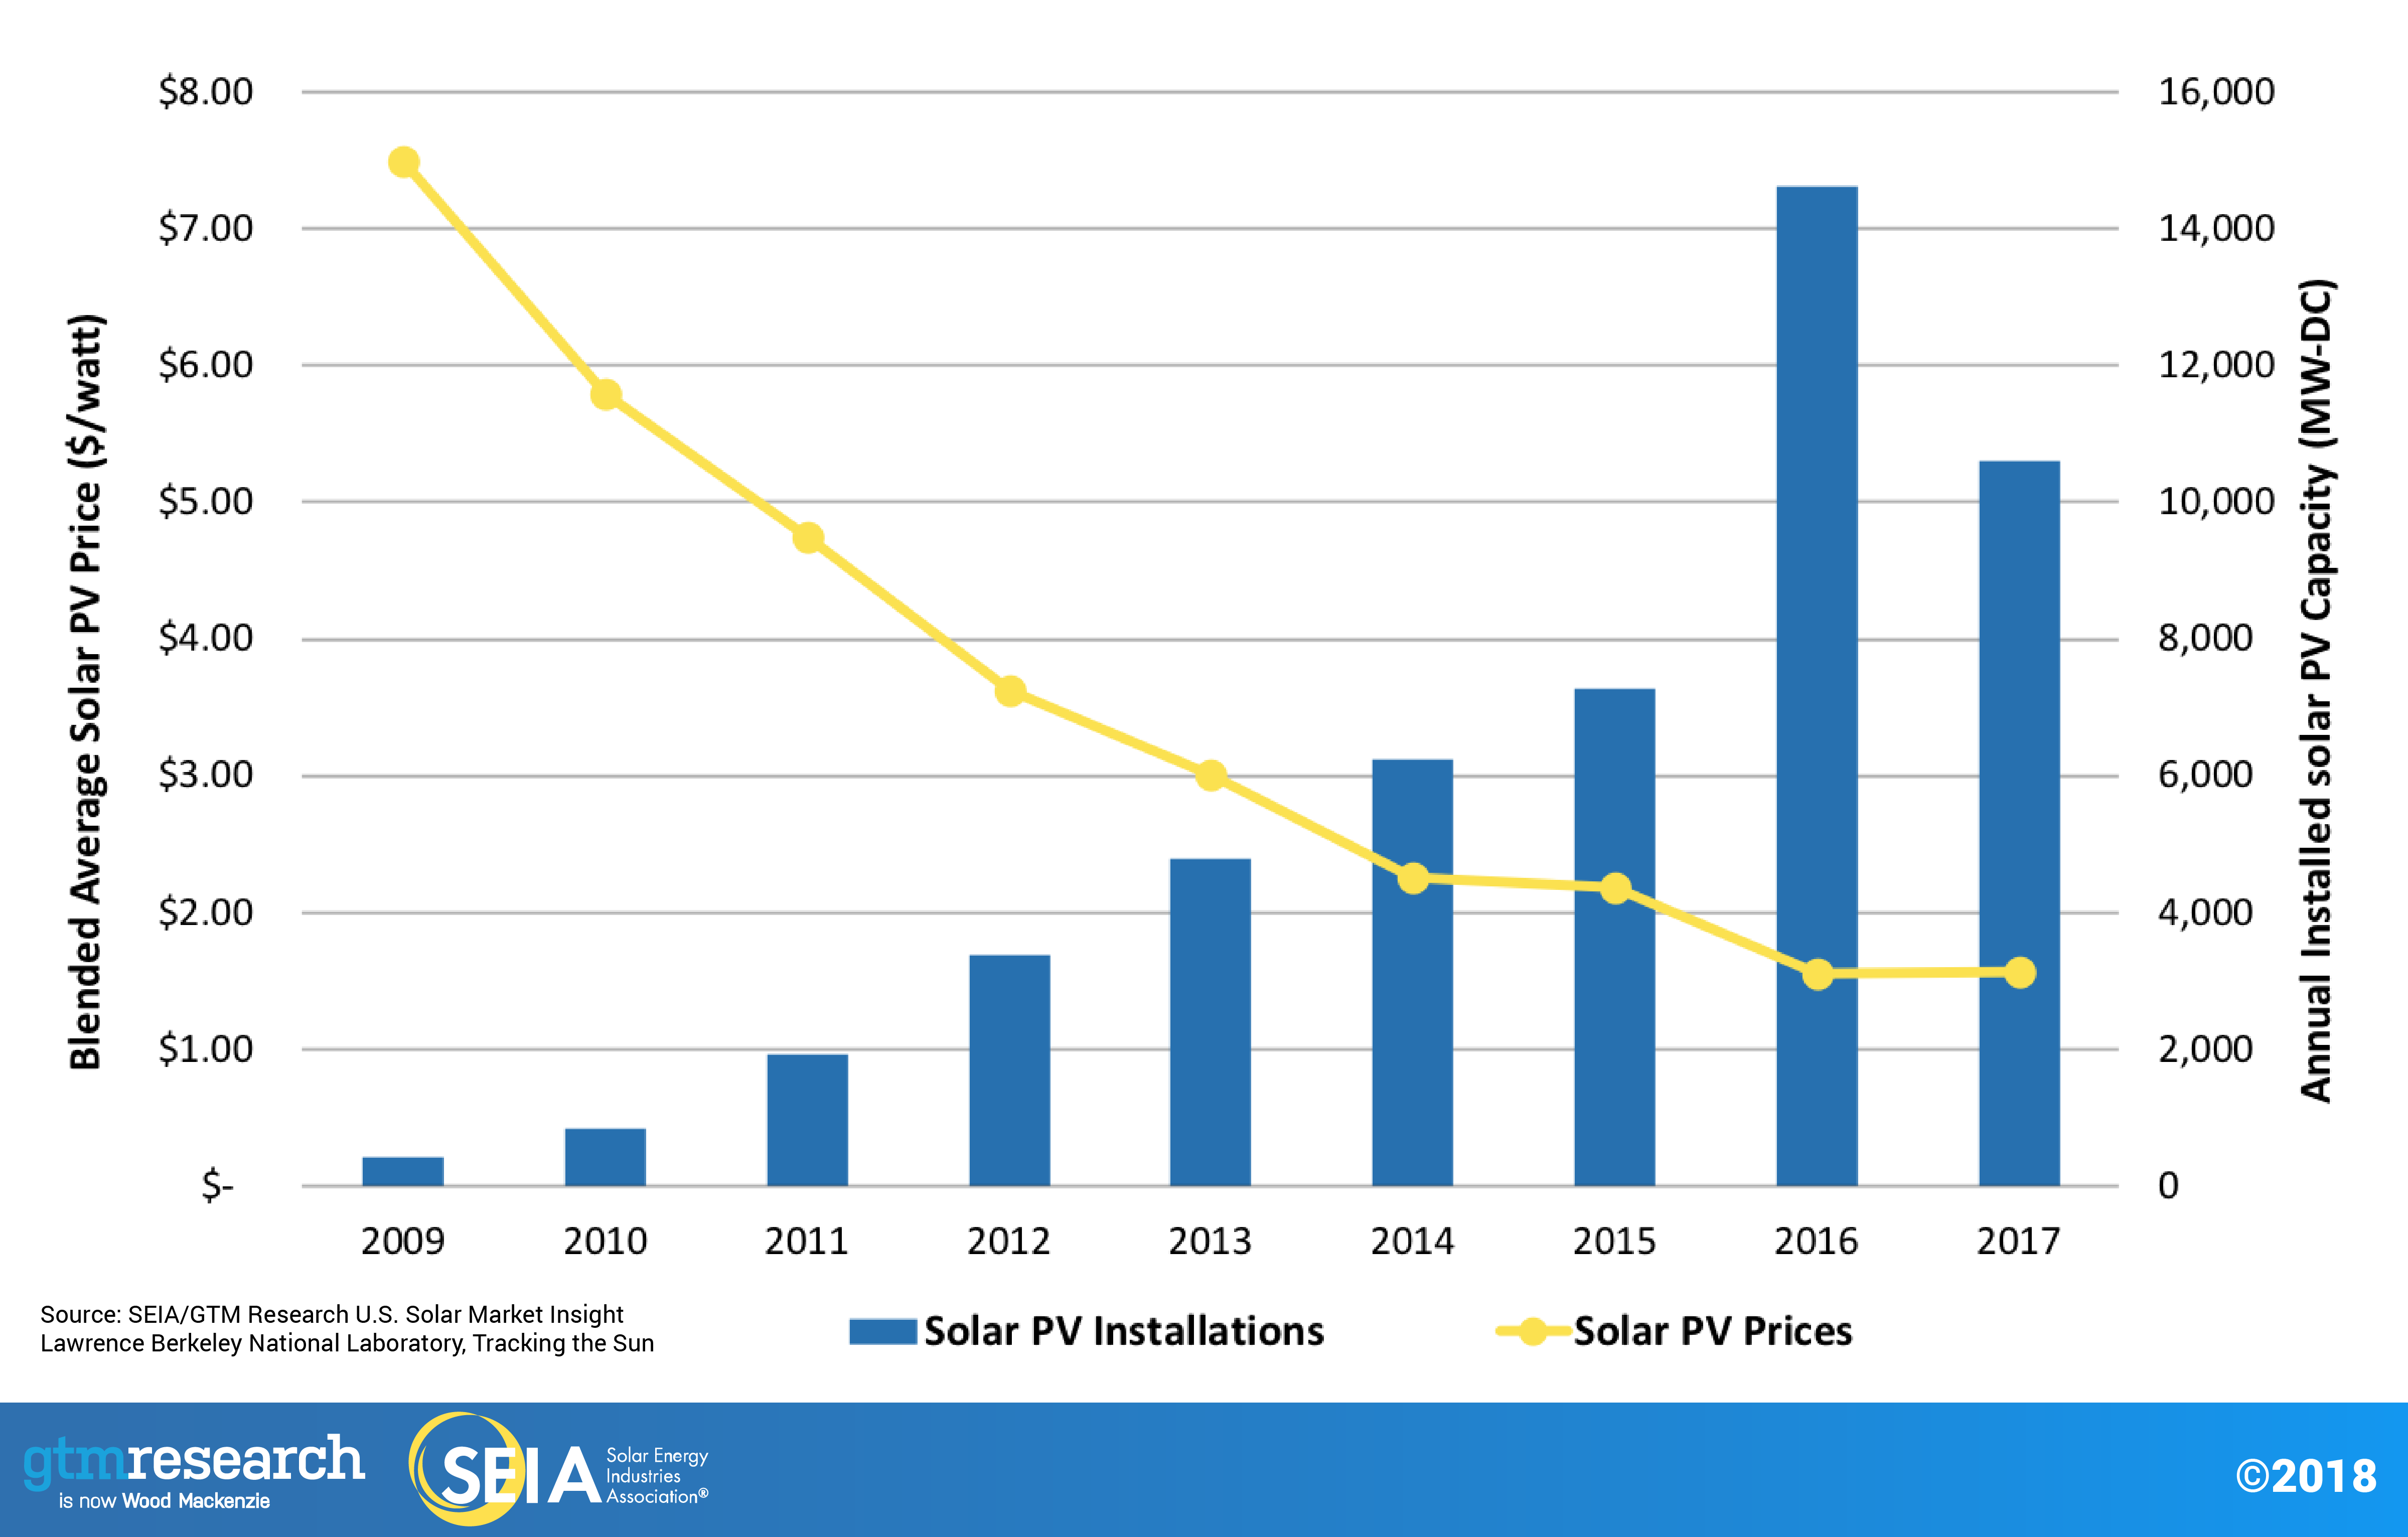 photovoltaic-cost-declines-over-time